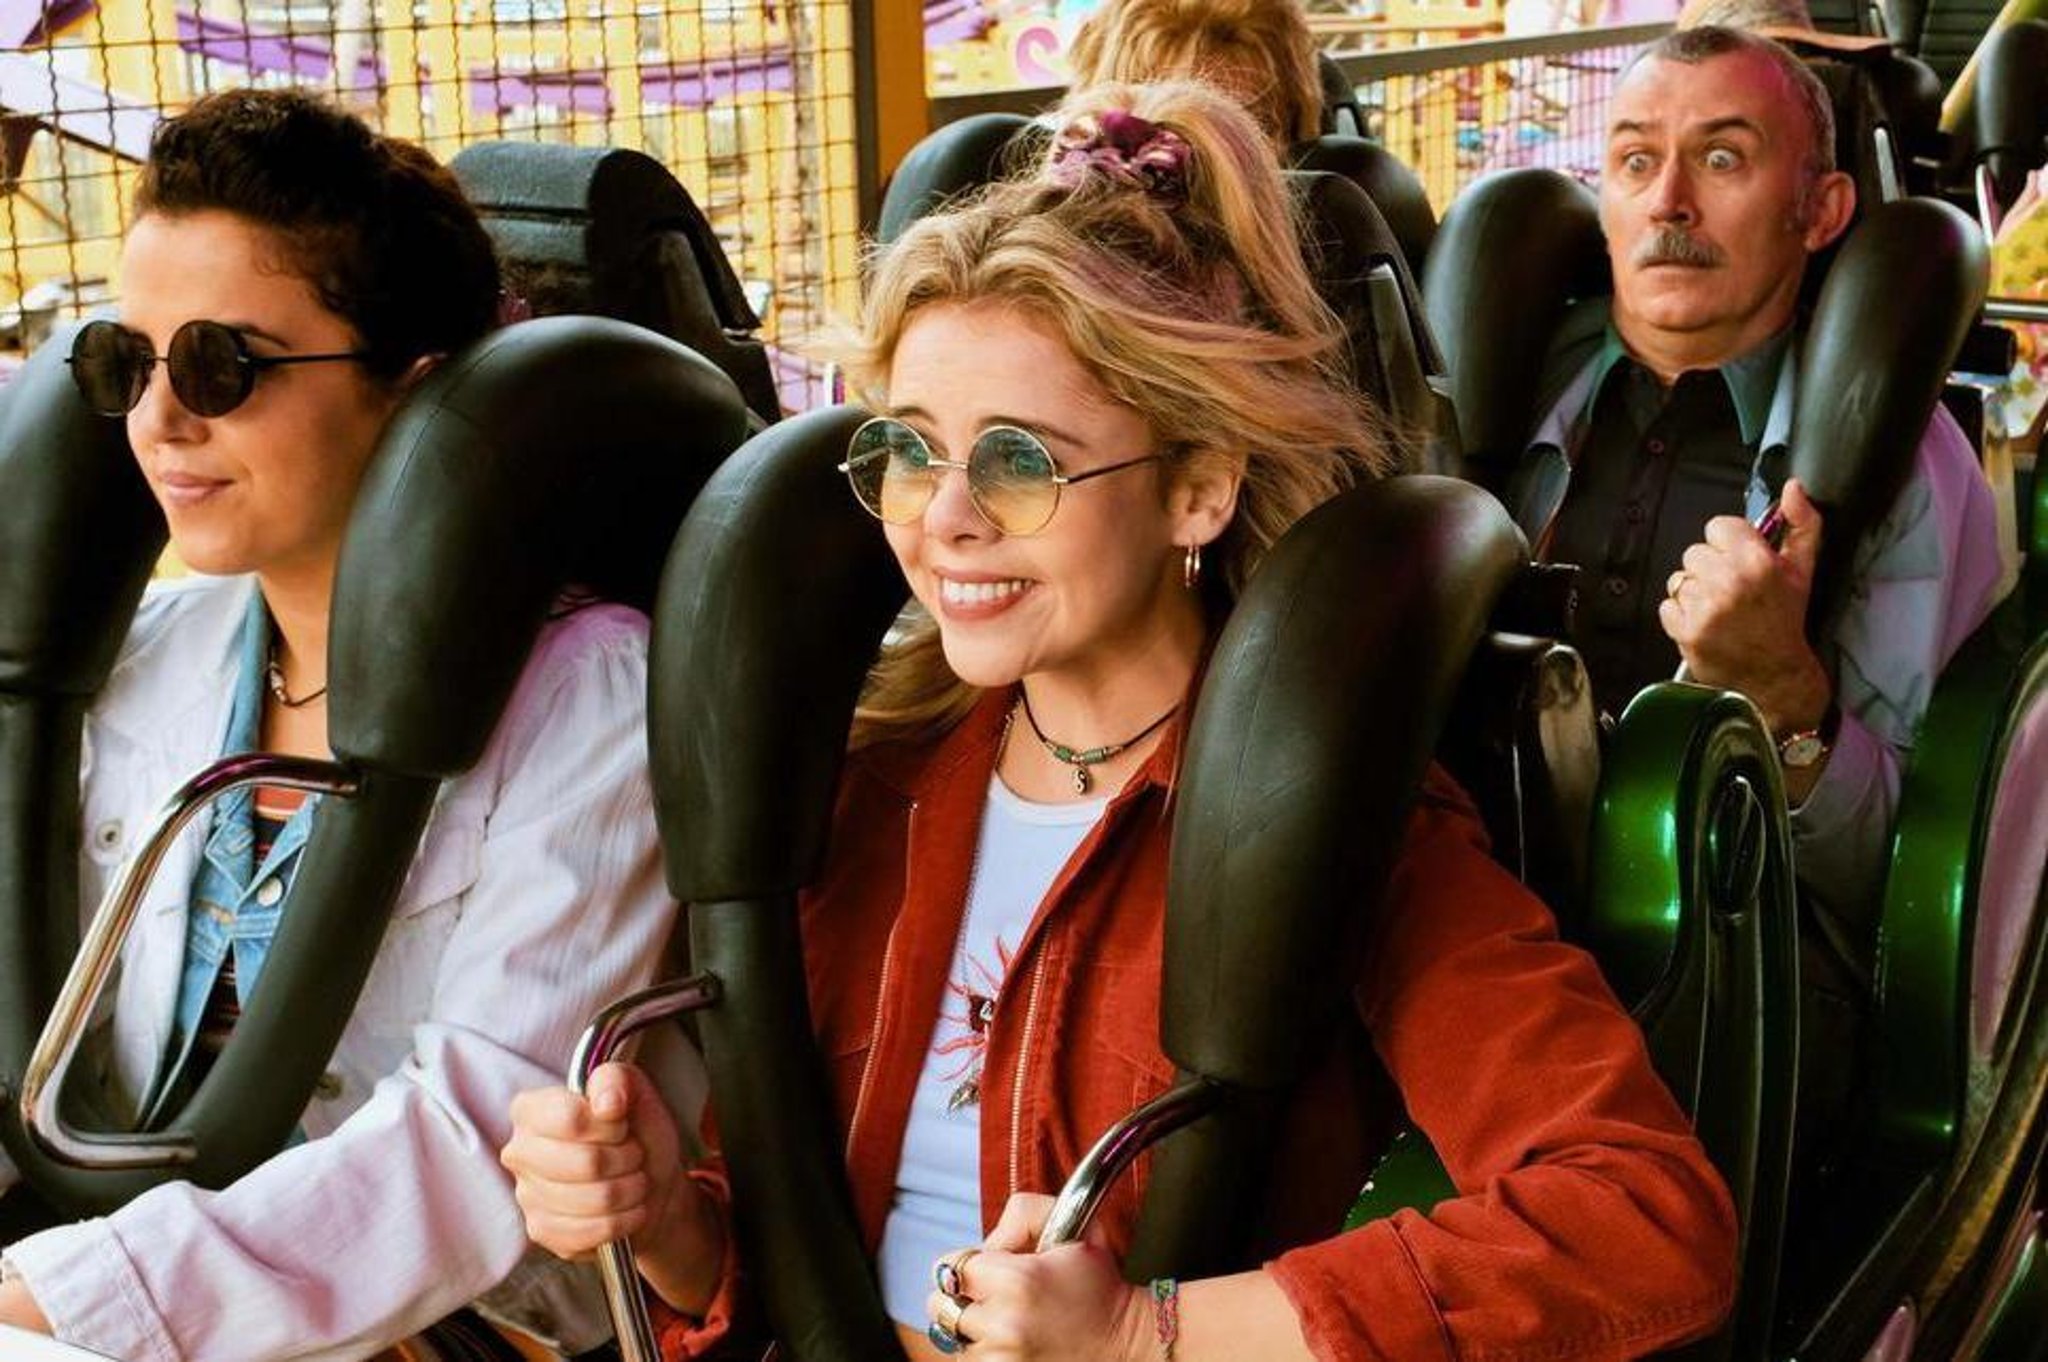 Derry Girls: See fans reaction as Barry's rollercoaster and Amy Huberman appear in Episode 3